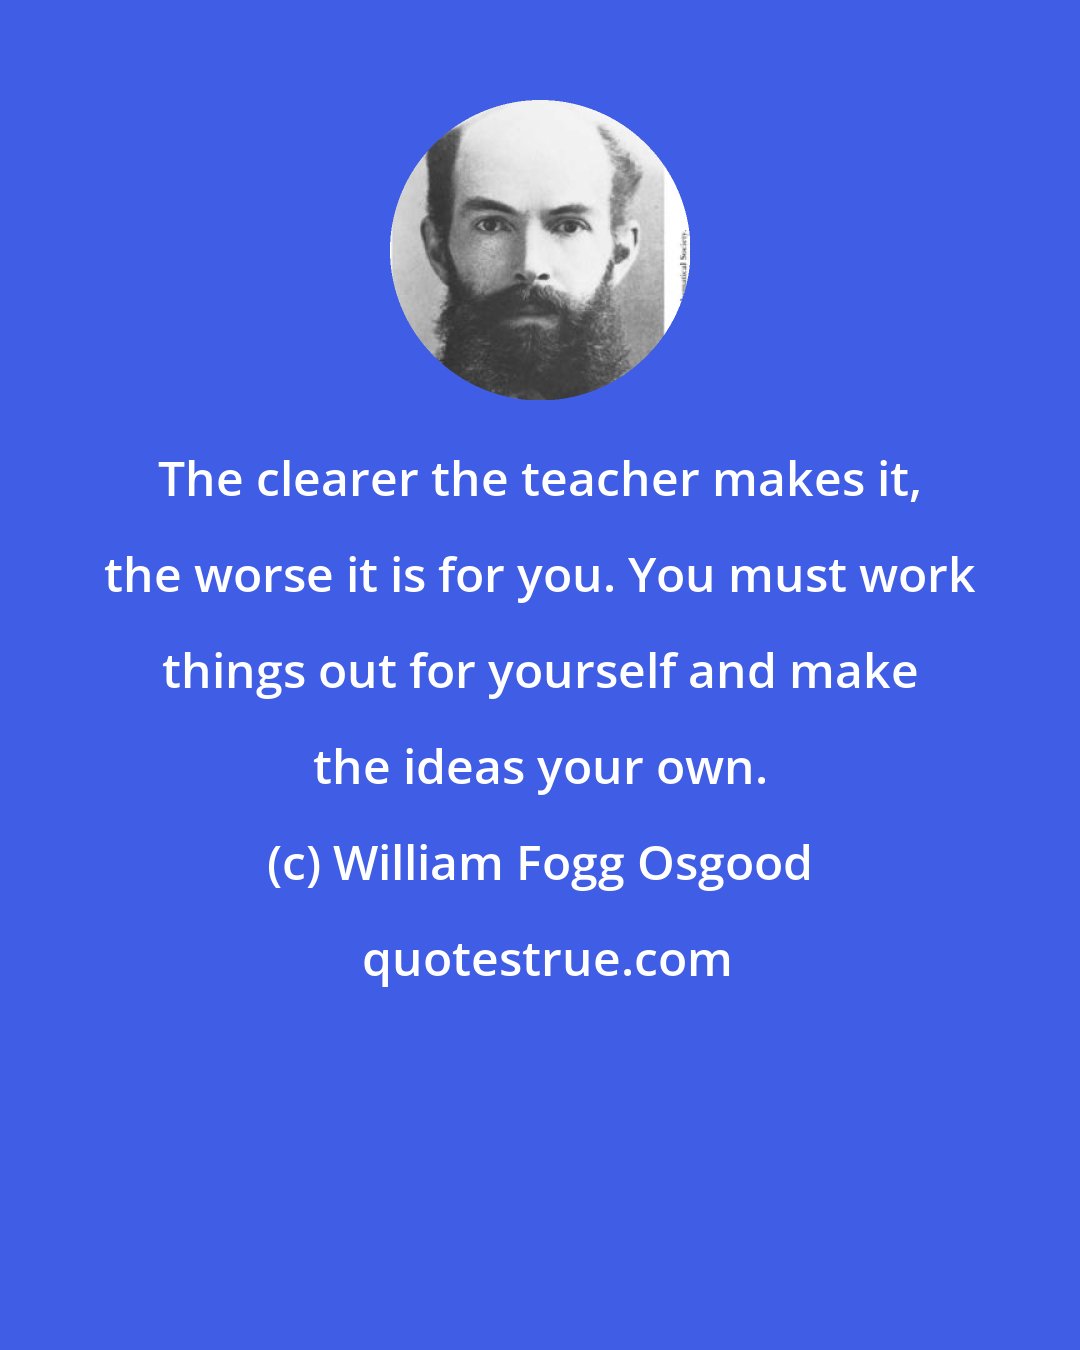 William Fogg Osgood: The clearer the teacher makes it, the worse it is for you. You must work things out for yourself and make the ideas your own.